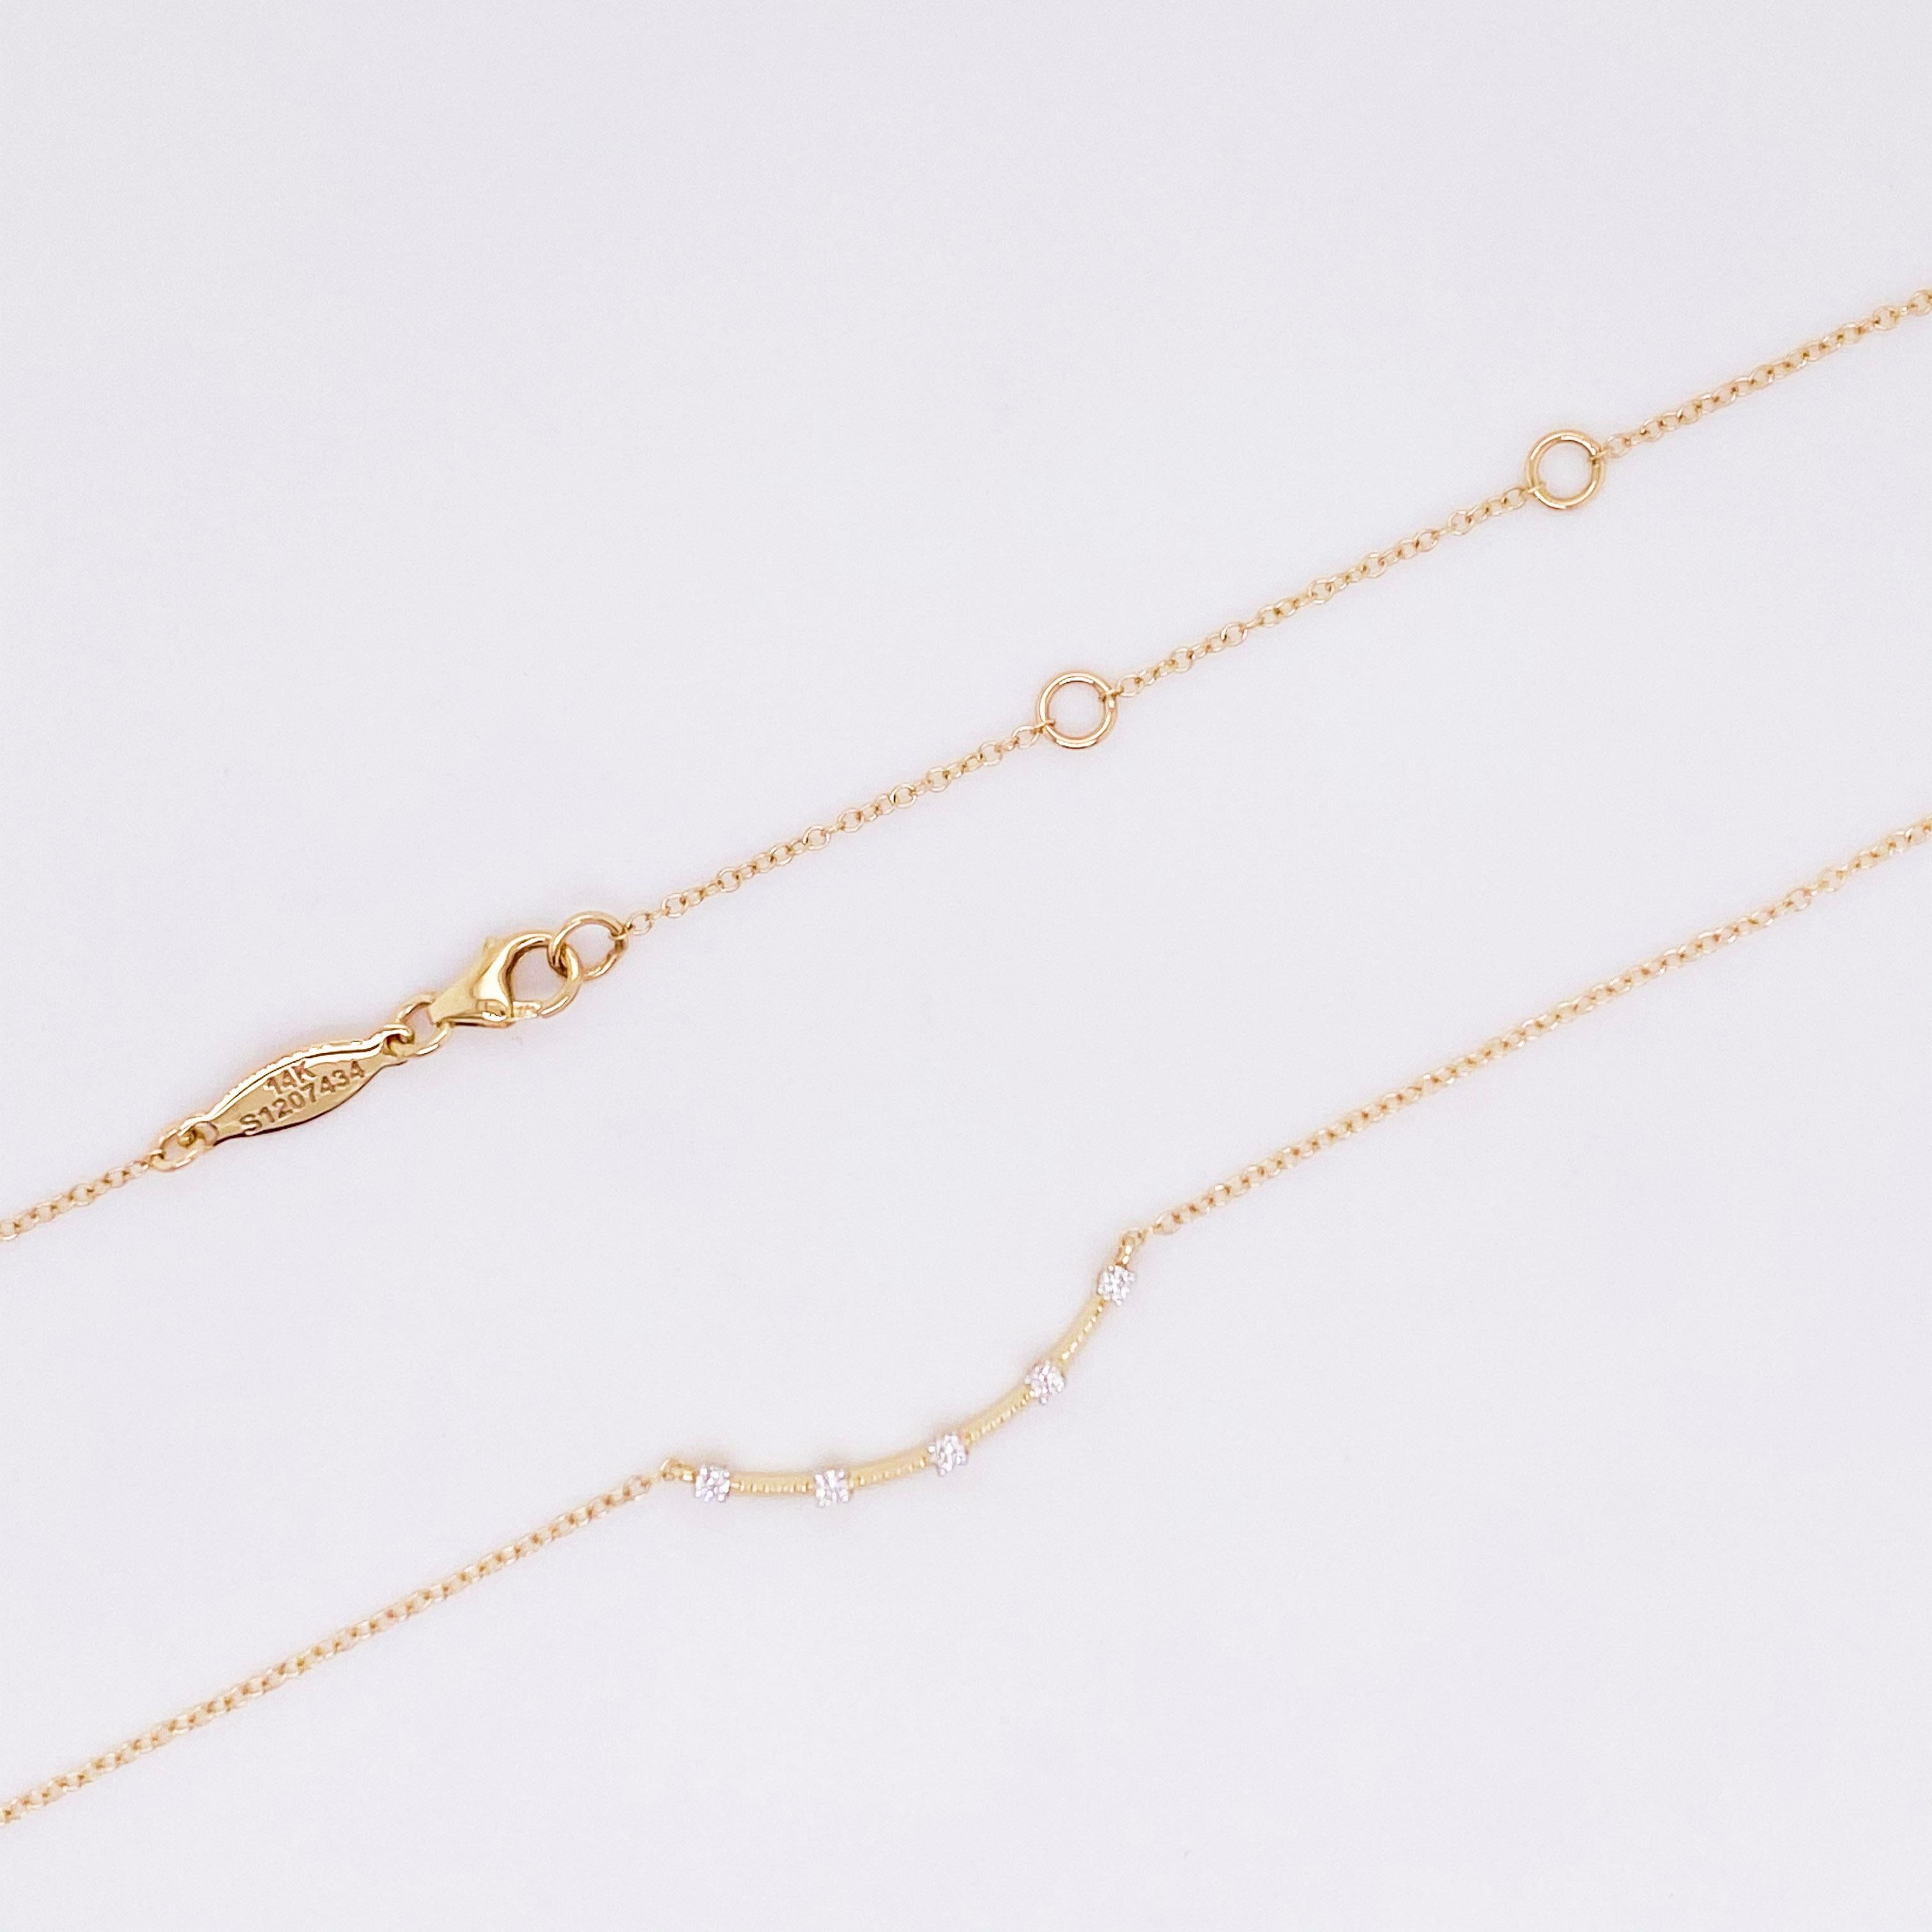 Round Cut Diamond Bar Necklace, 14 Karat Yellow Gold, Curved Bar Necklace, NK6137Y45JJ For Sale